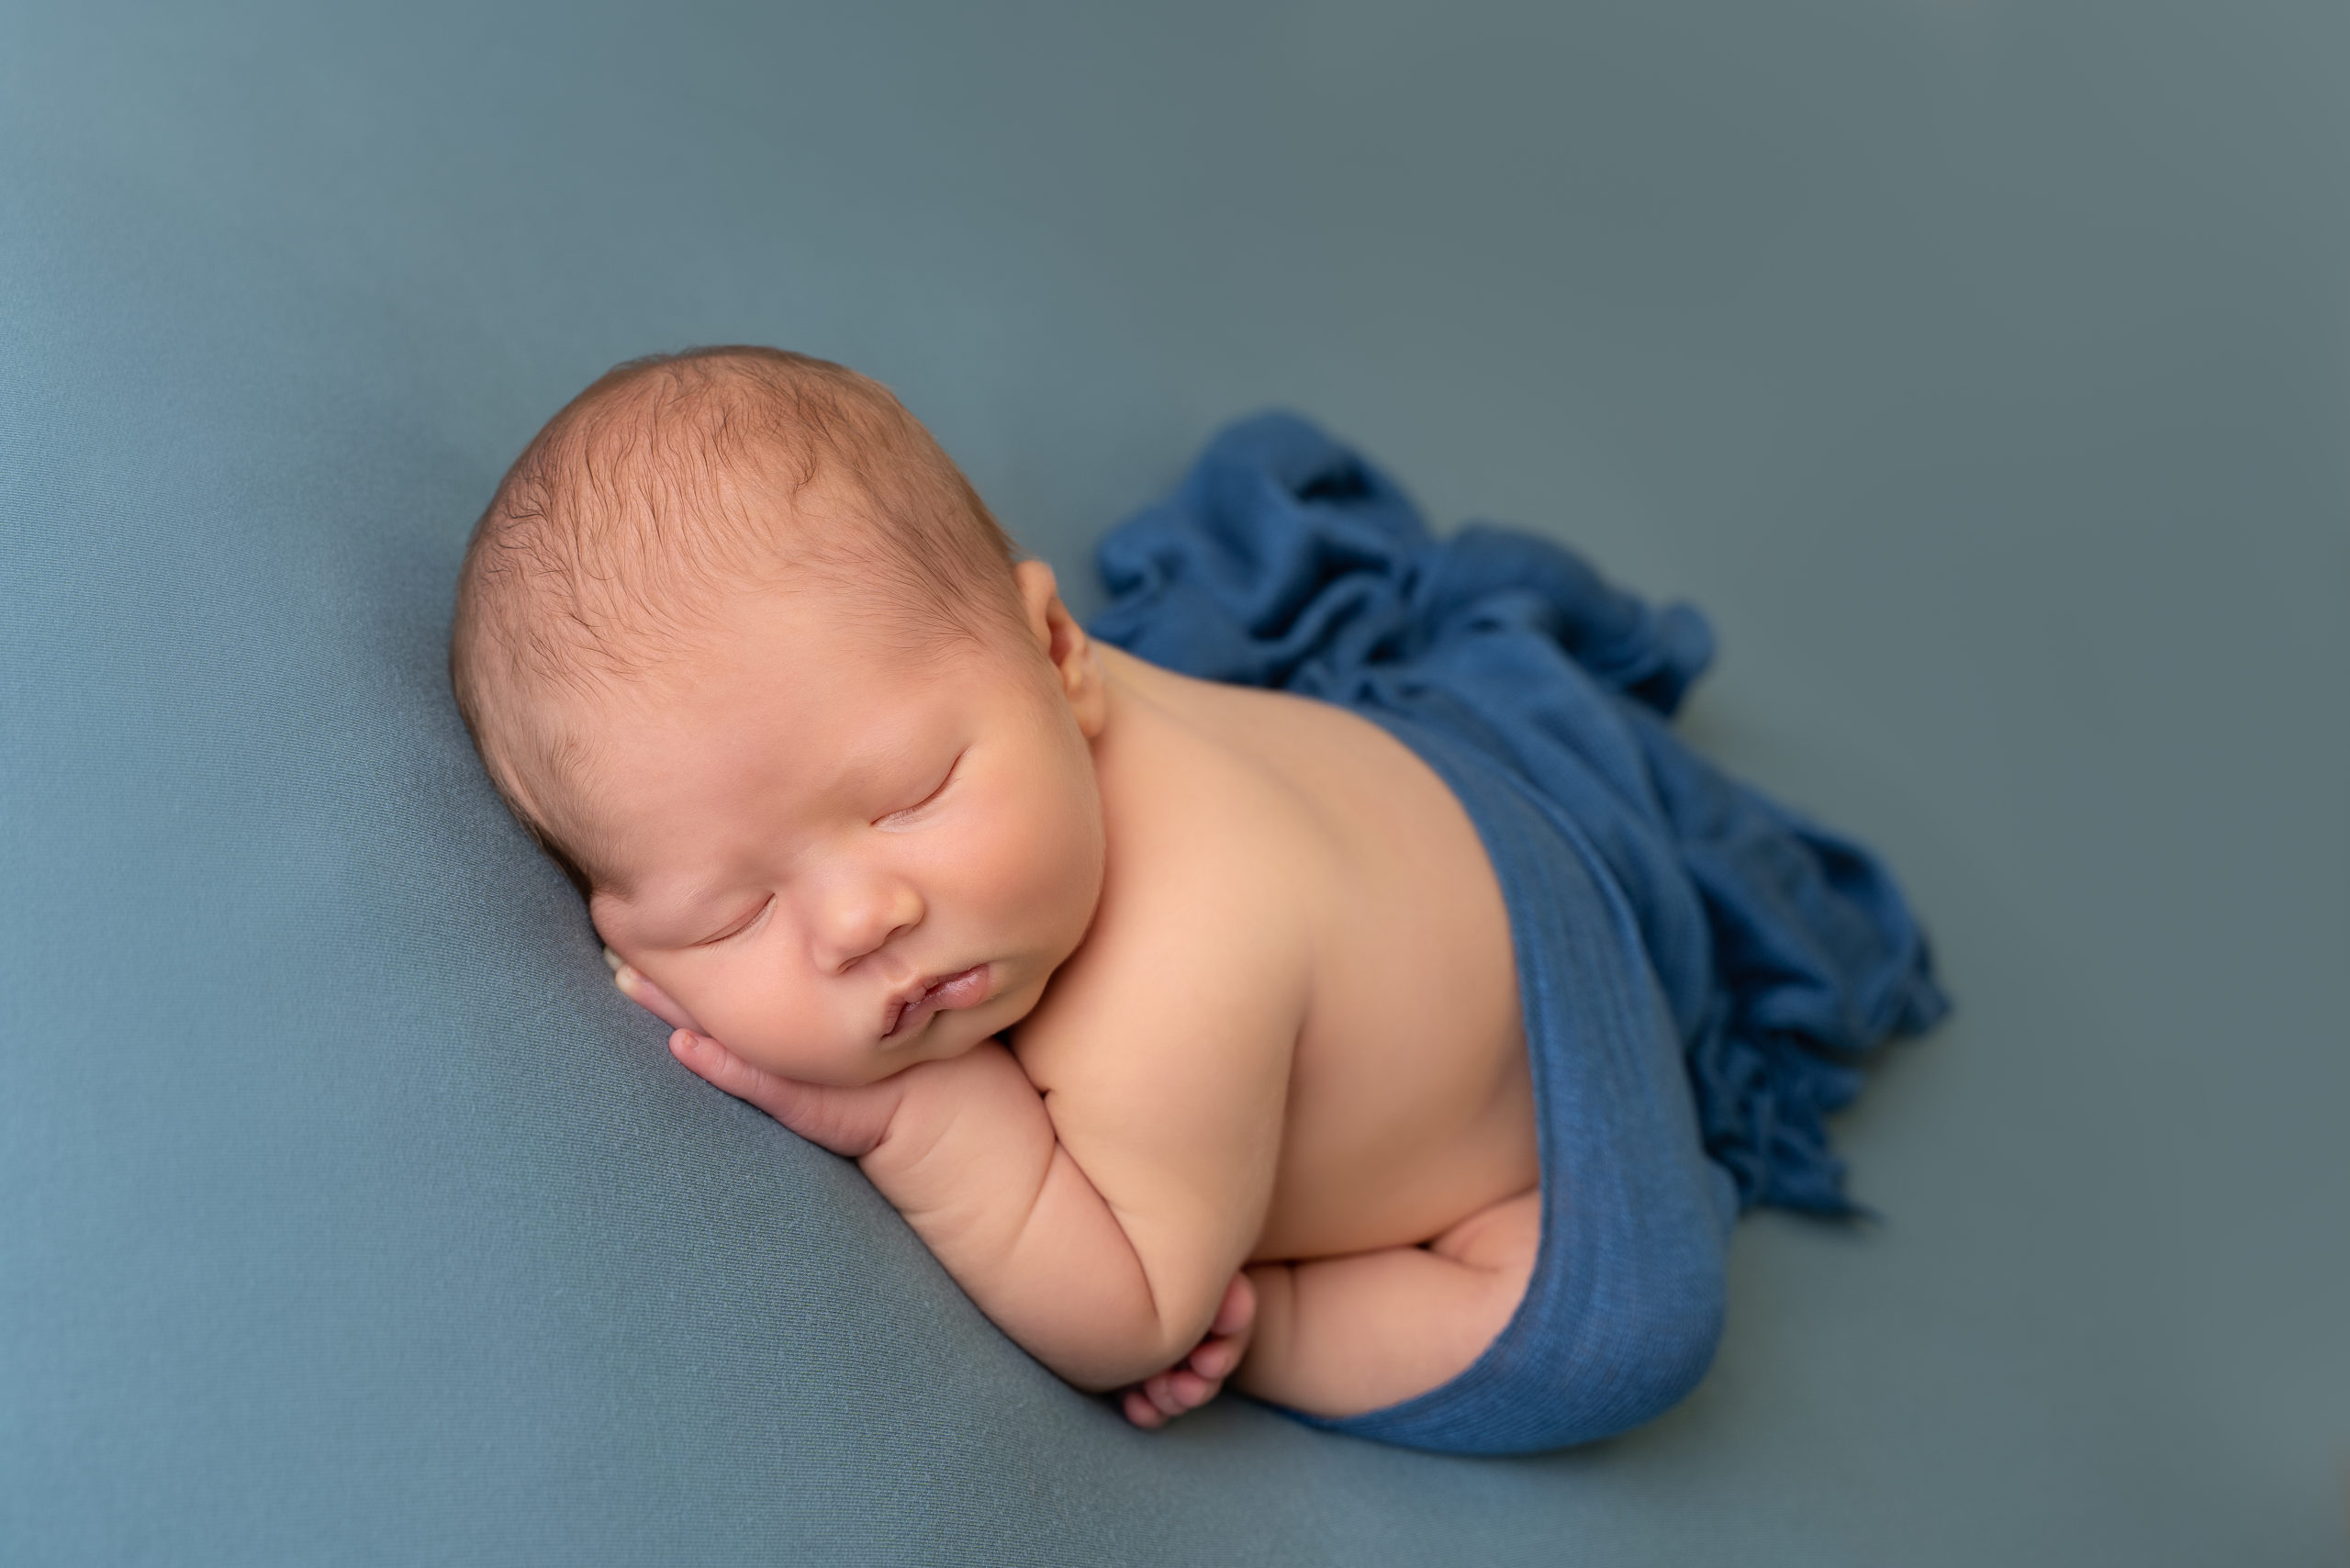 newborn baby photo of baby boy on teal blanket with teal wrap draped over his bottom by newborn photographer edinburgh Beautiful bairns Photography